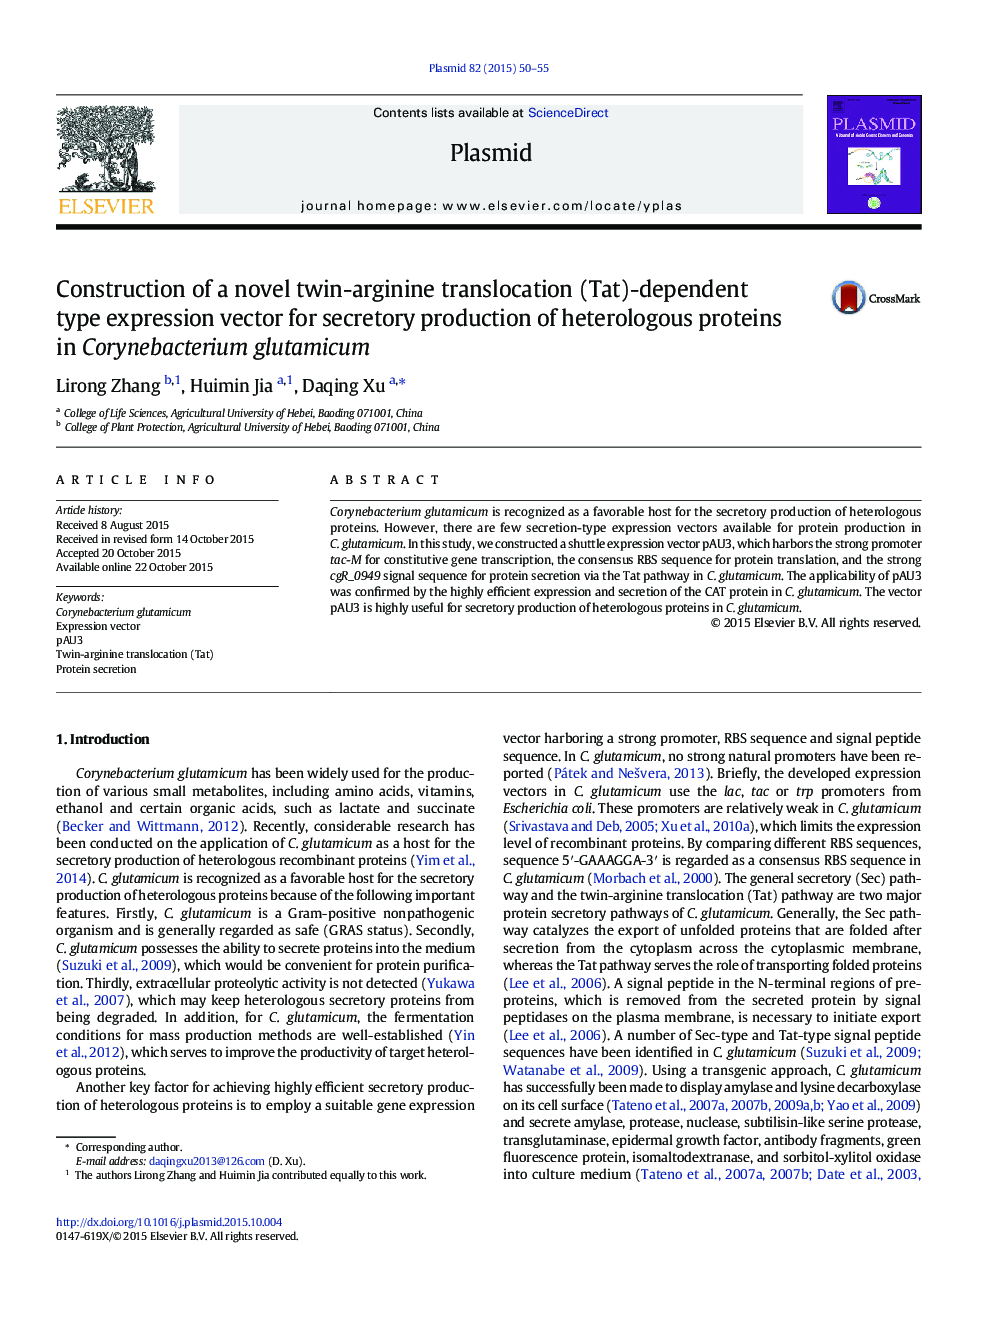 Construction of a novel twin-arginine translocation (Tat)-dependent type expression vector for secretory production of heterologous proteins in Corynebacterium glutamicum